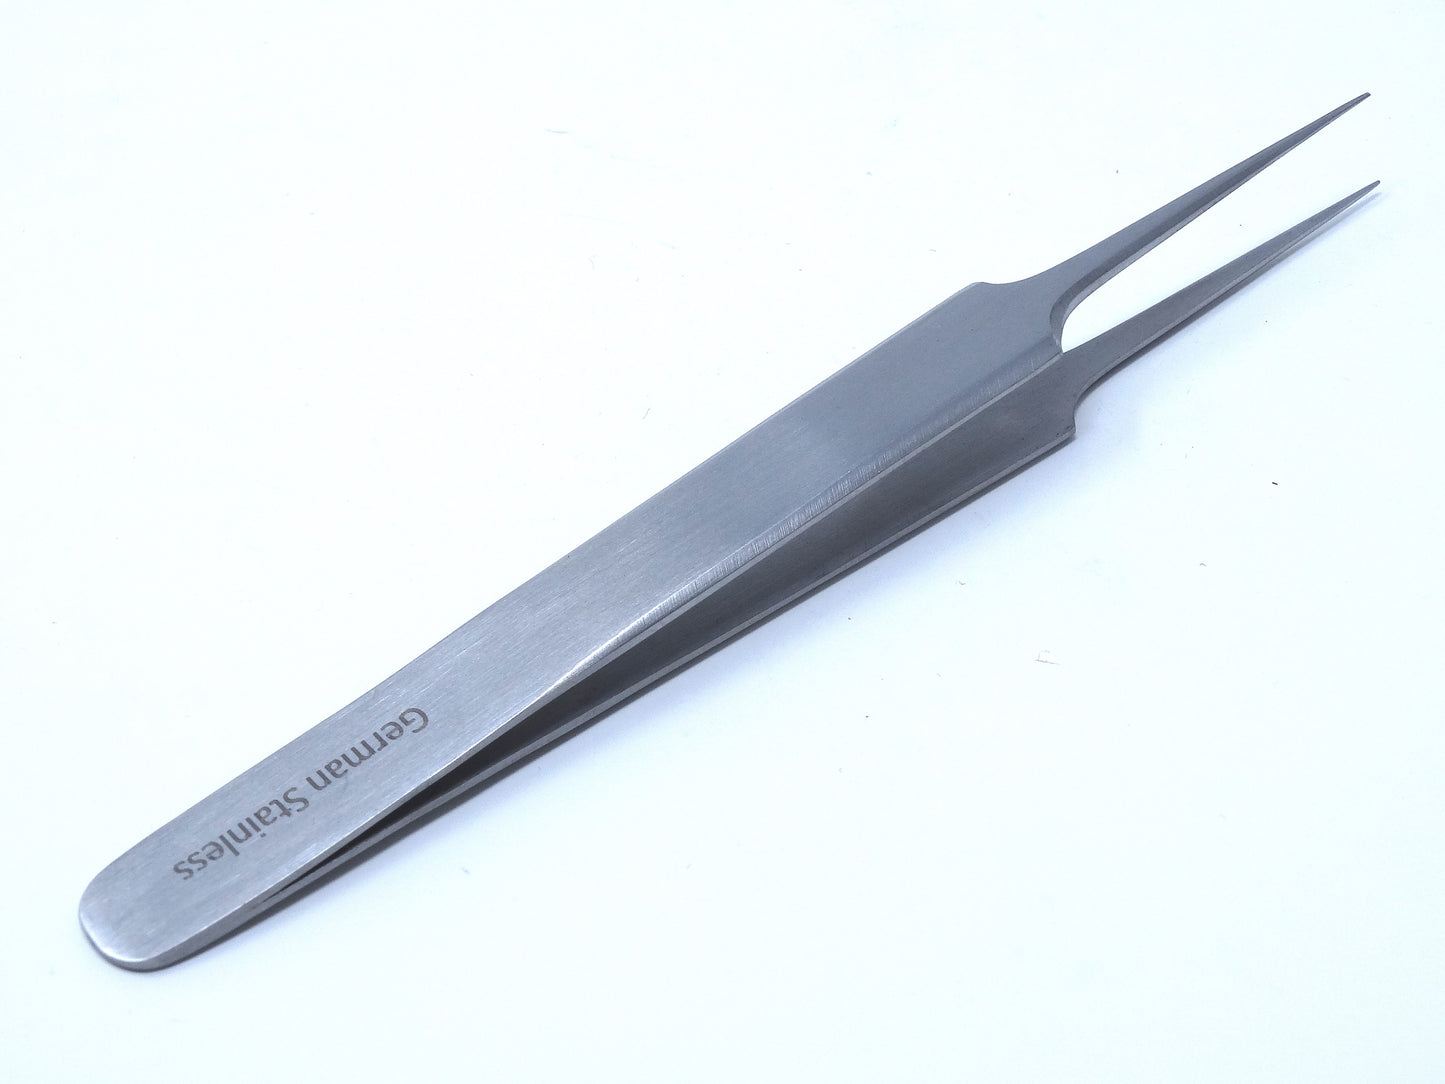 Stainless Steel Micro Surgical Forceps Tweezers A Type Straight, Ridged Handle, Fine Point, Premium Quality